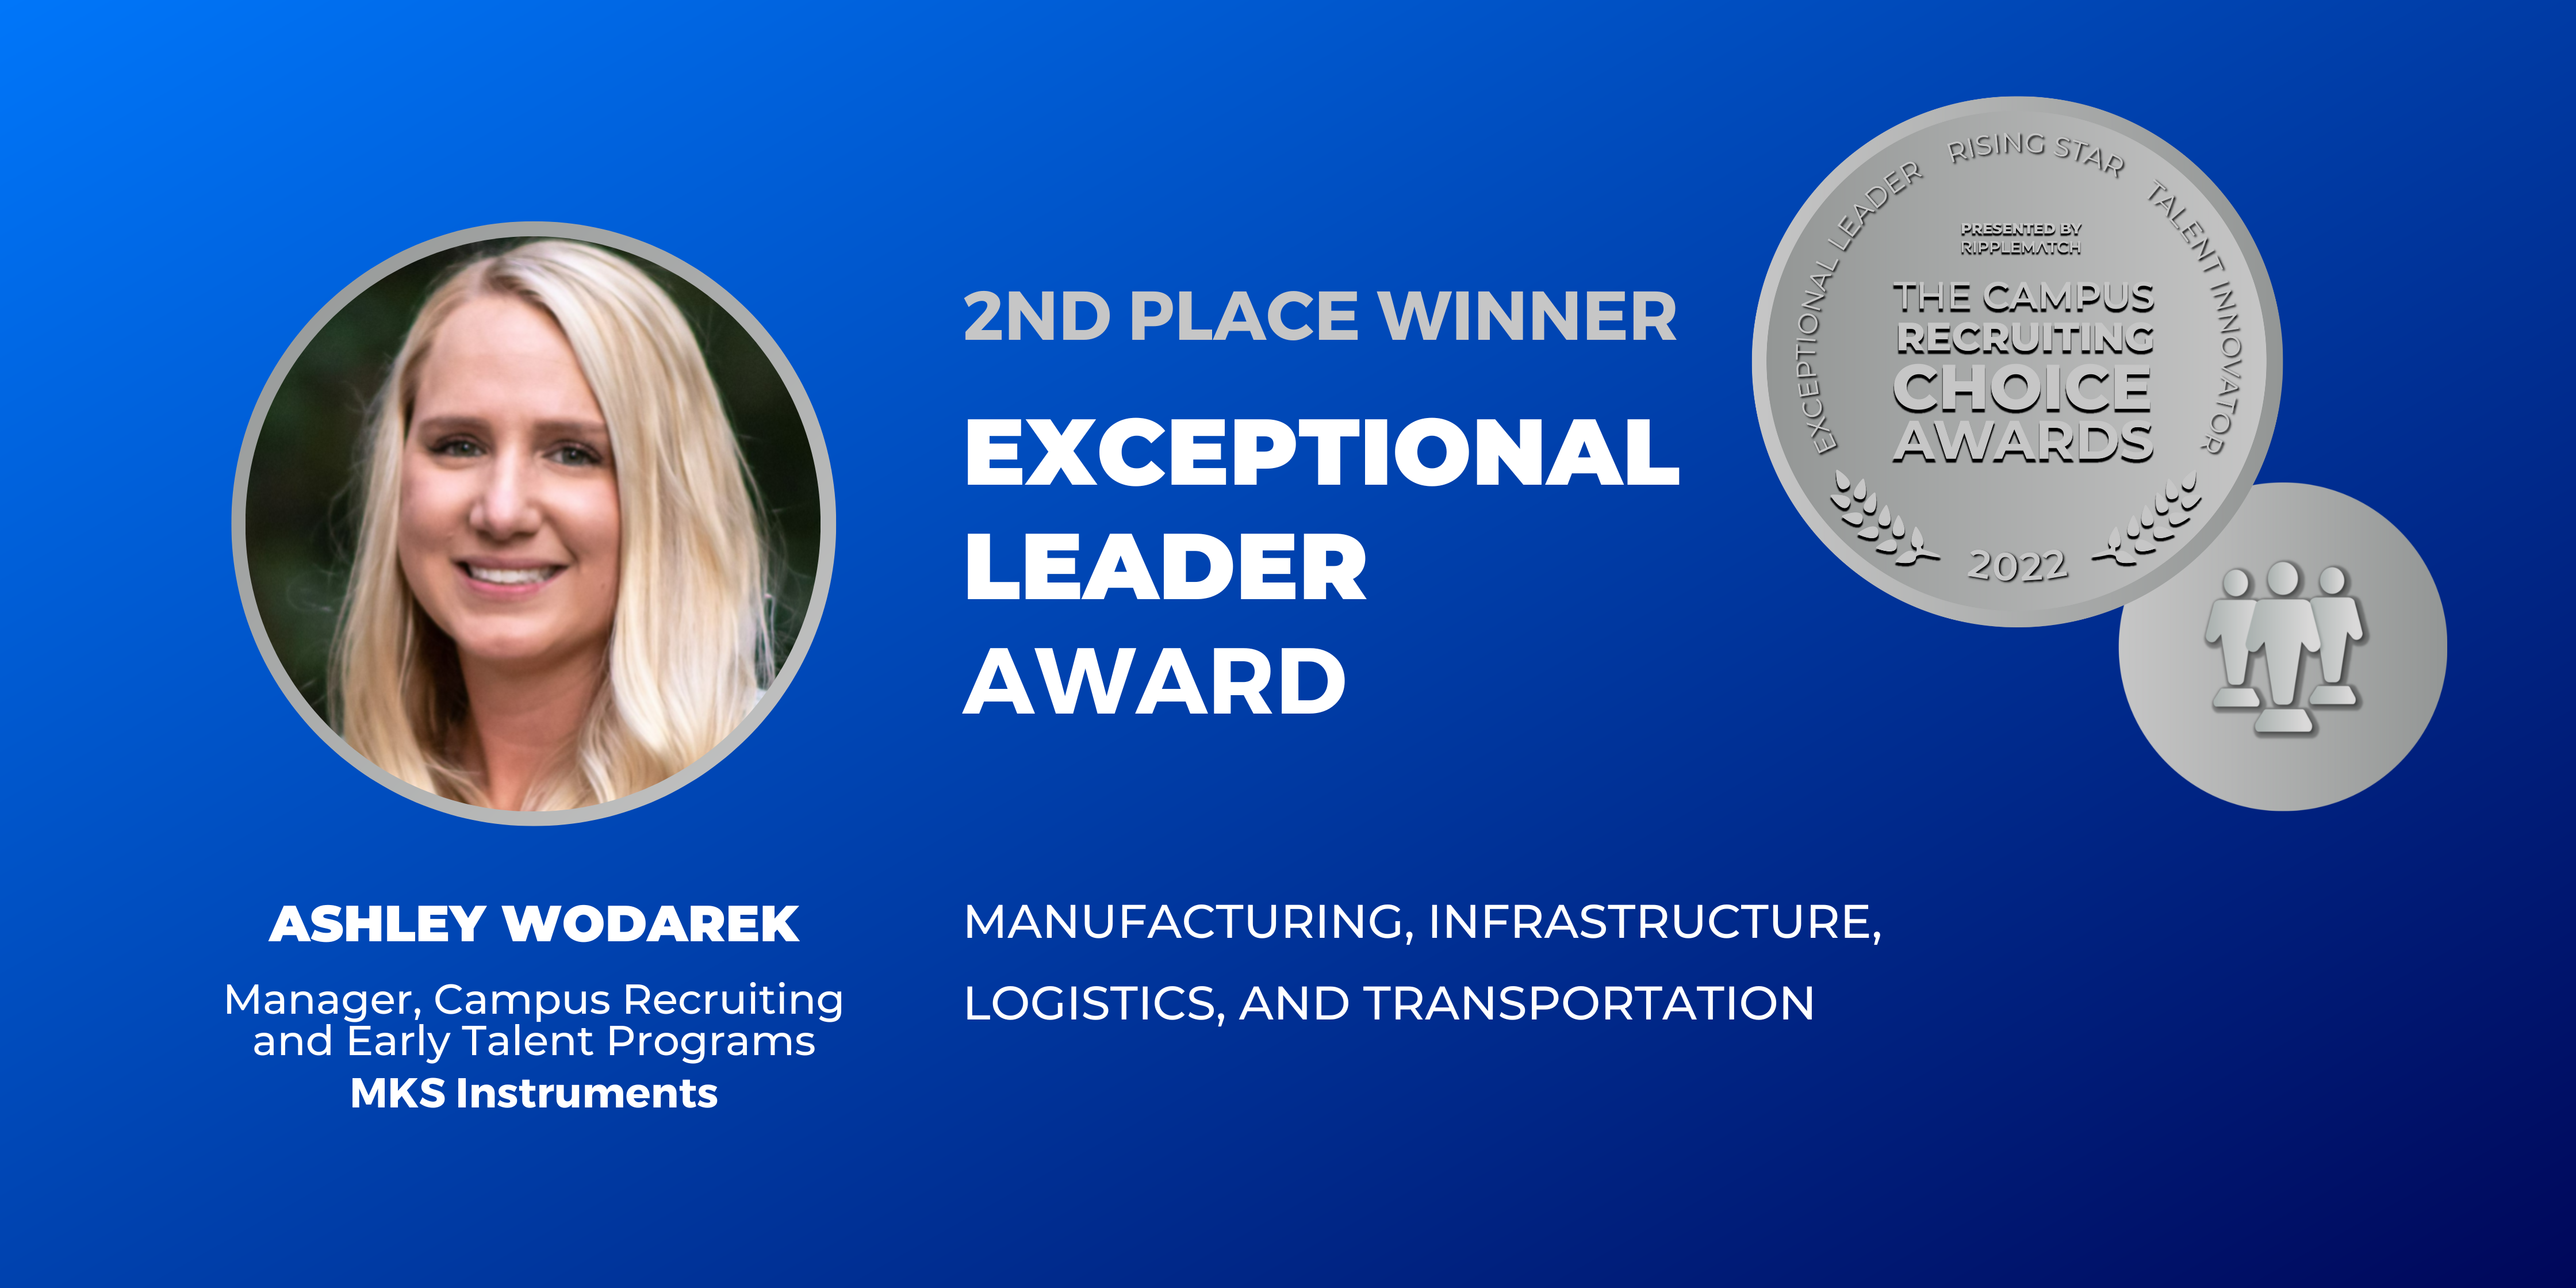 EXCEPTIONAL LEADER - 2nd place - Manufacturing, Infrastructure, Logistics, and Transportation - Ashley Wodarek